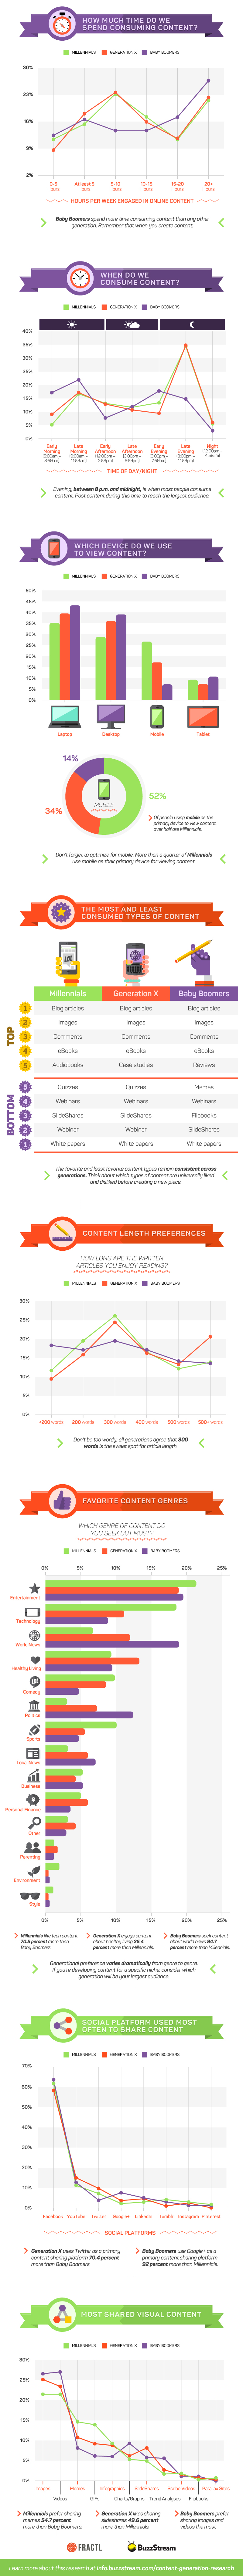 Generational Differences on Content Consumption